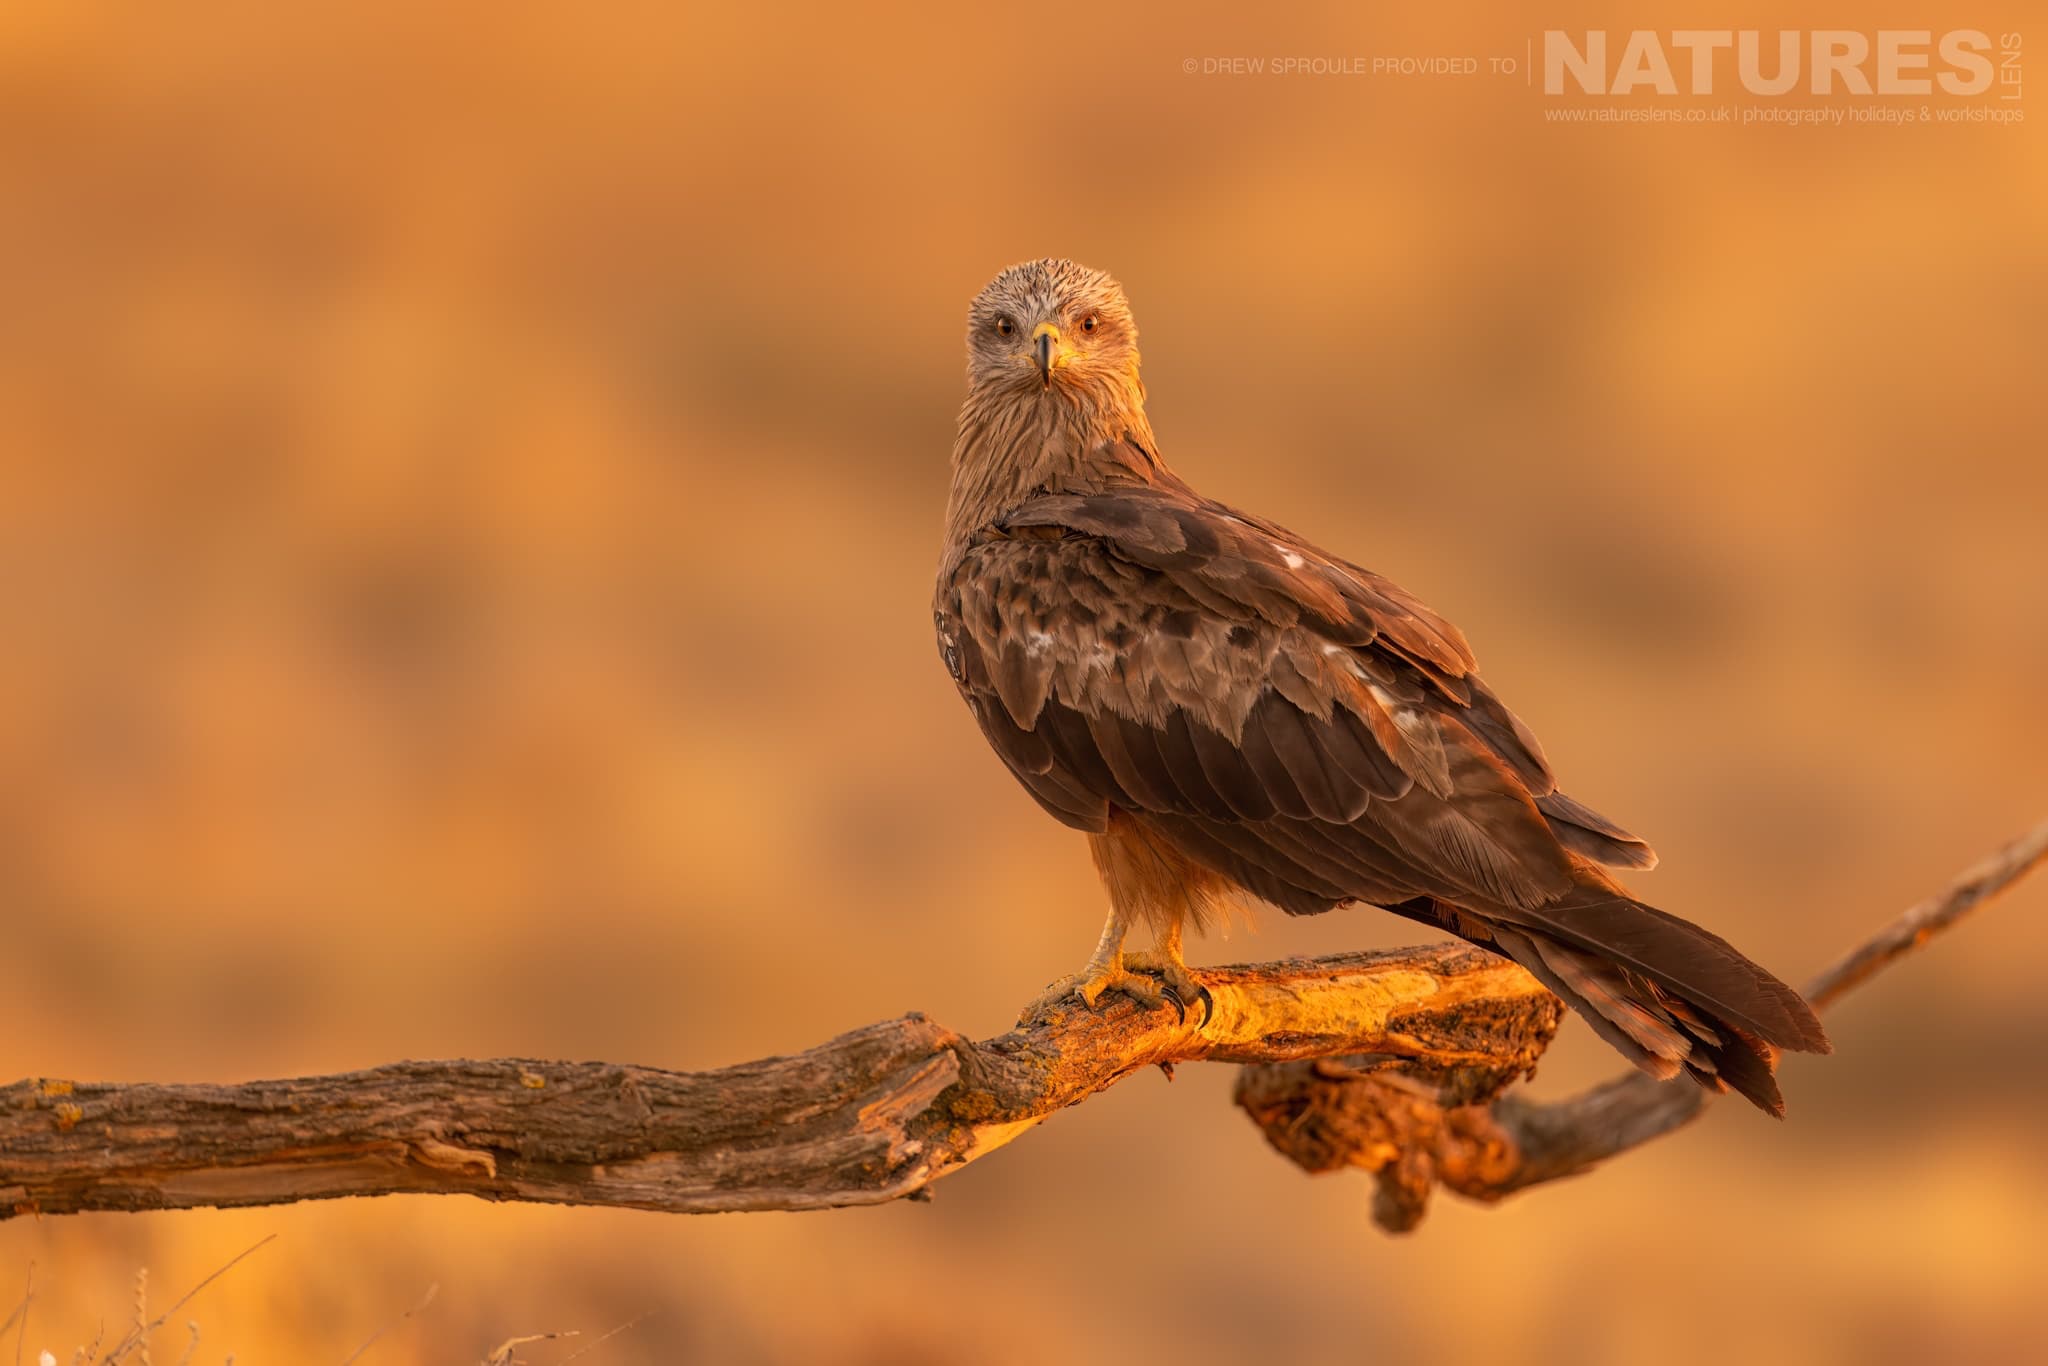 One Of The Many Black Kites Photographed During The Golden Hour Typical Of The Type Of Image You Will Have Opportunities To Capture During Our Birds Of Toledo Photography Holiday